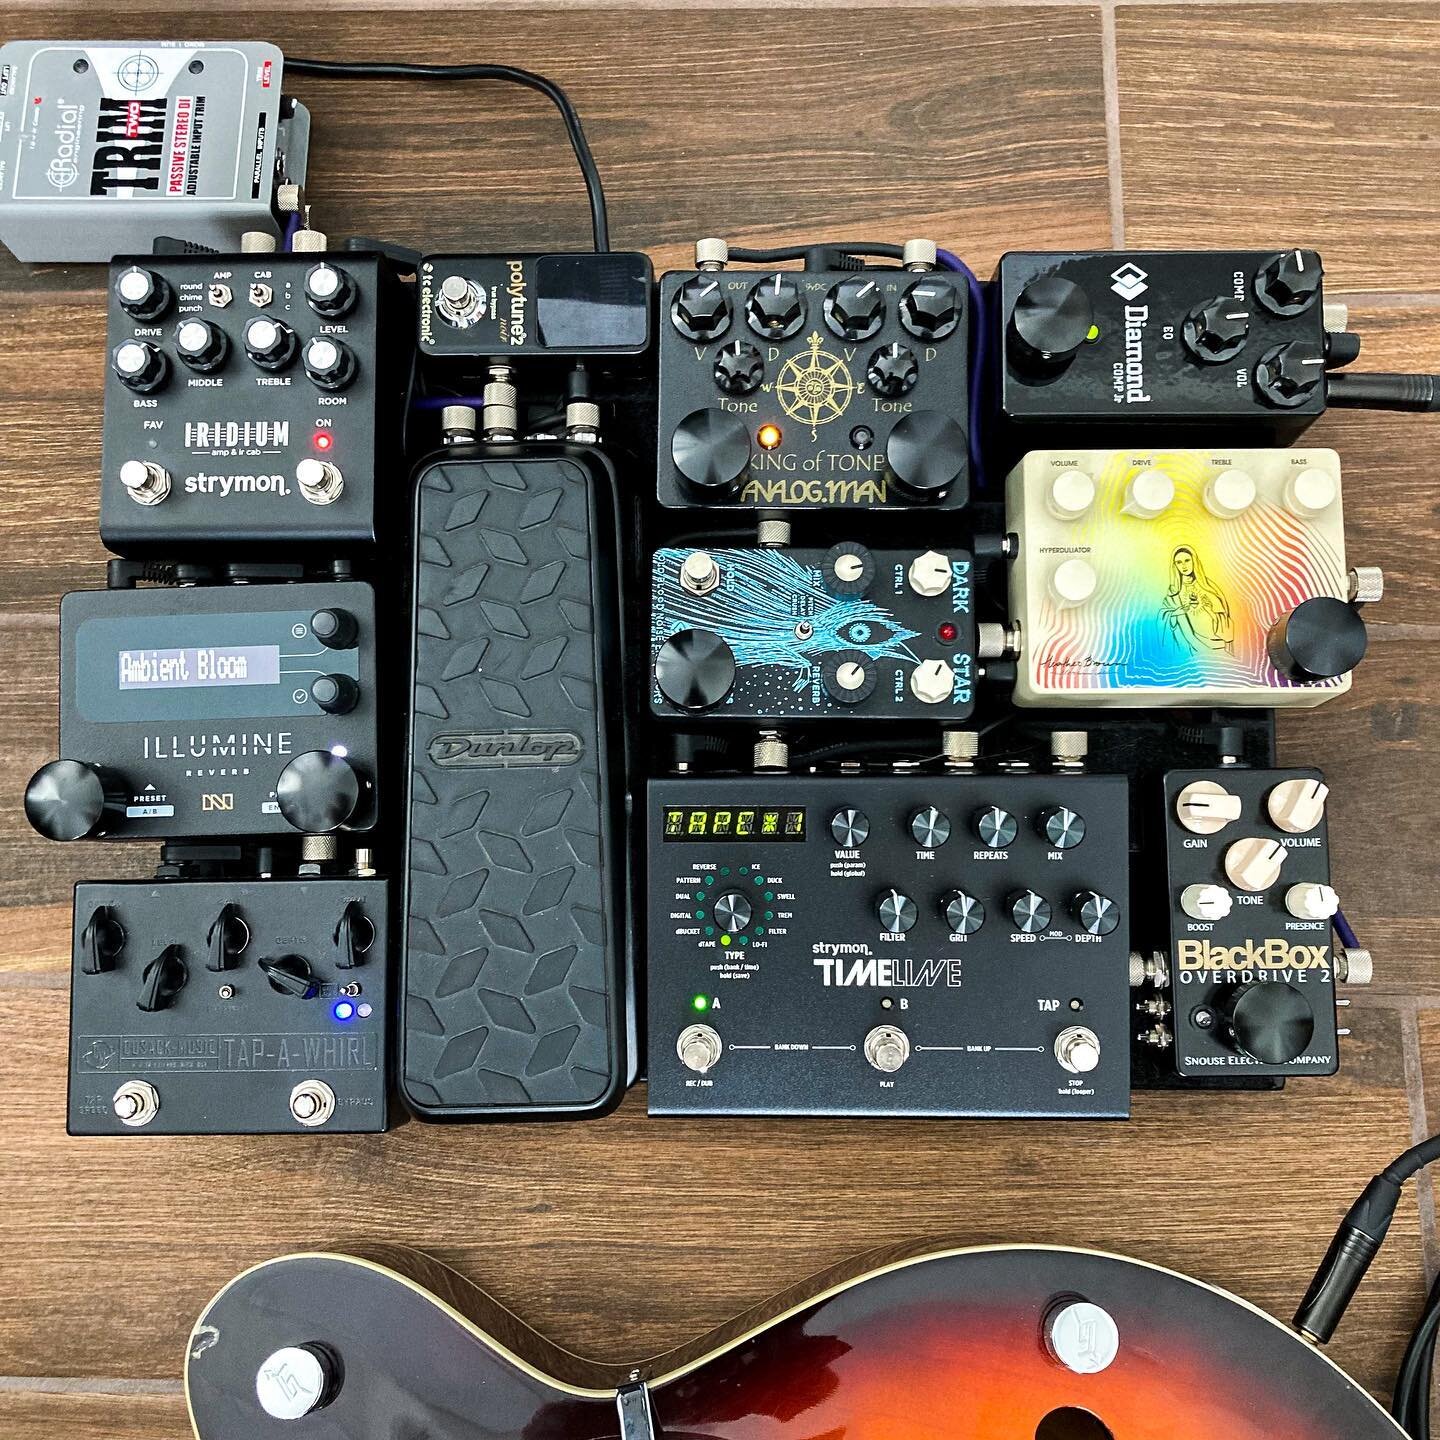 This pedalboard reminds me of the image of Mary as the moon in the night, reflecting the light of Christ. As Venerable Archbishop Fulton Sheen said:

&ldquo;God who made the sun, also made the moon. The moon does not take away from the brilliance of 